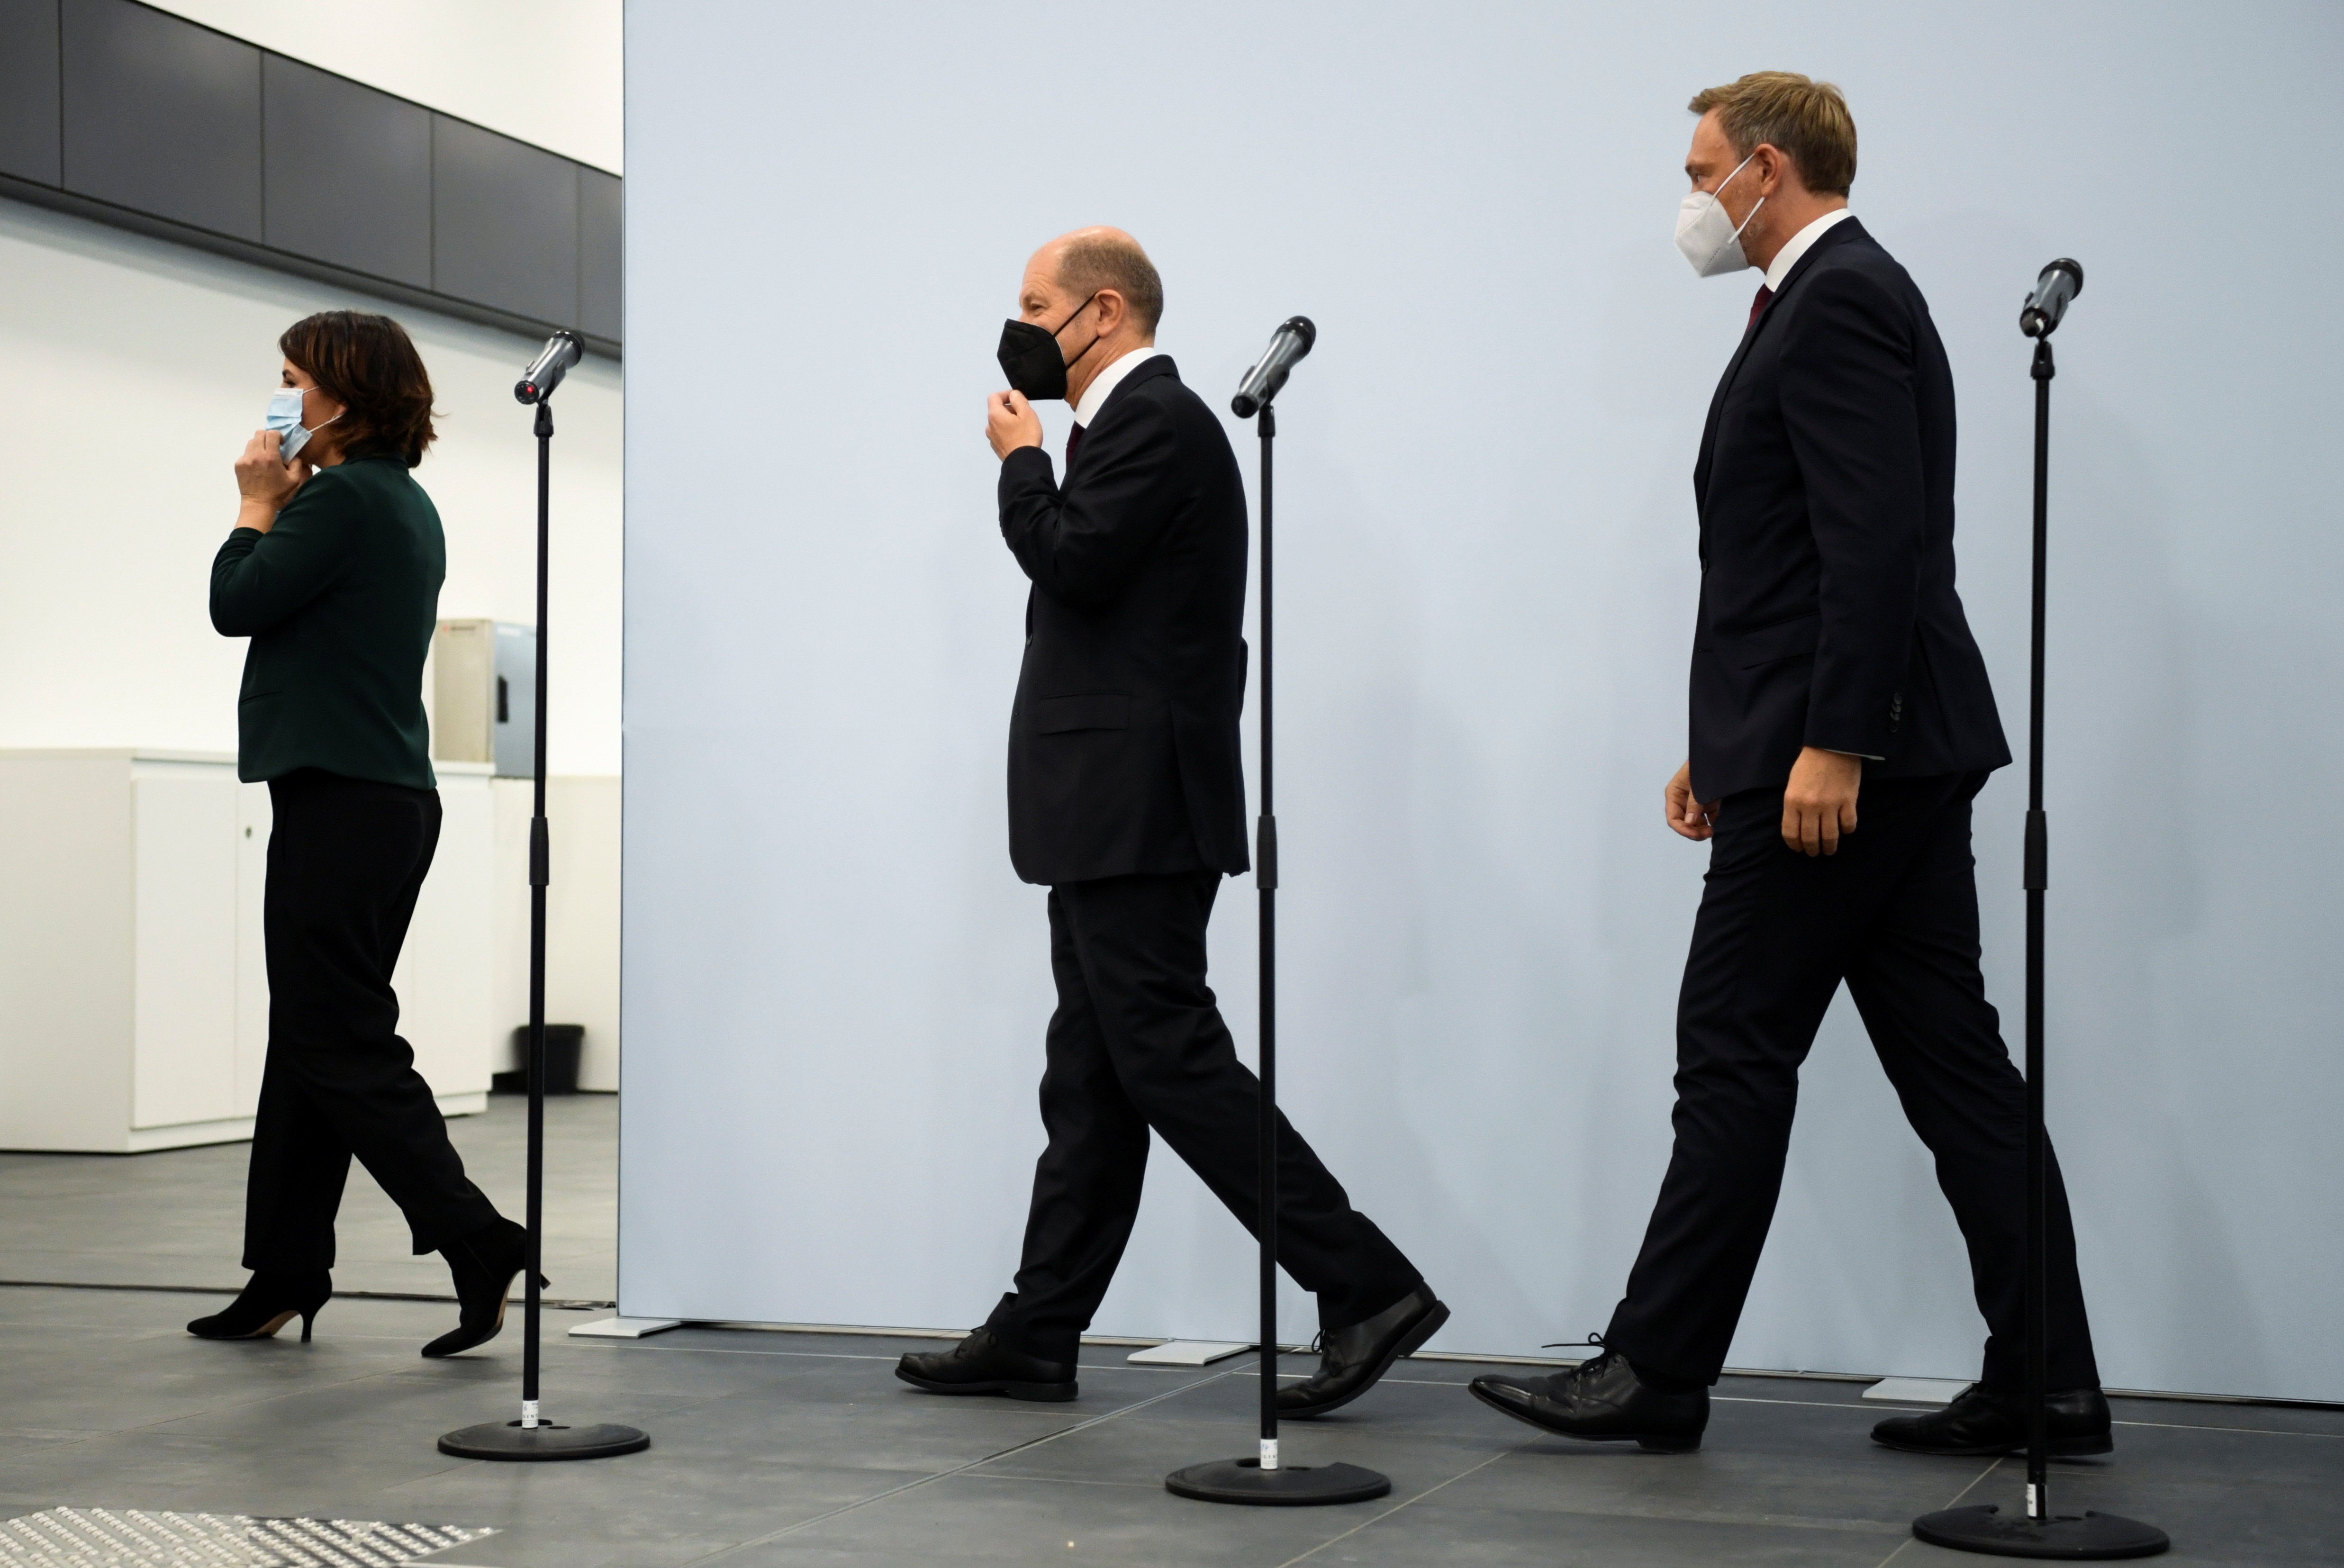 Germany's Greens party co-leader Annalena Baerbock, Social Democratic Party (SPD) top candidate for chancellor Olaf Scholz and Free Democratic Party (FDP) leader Christian Lindner leave after a statement following a meeting for exploratory talks for a possible new government coalition in Berlin, Germany, October 15, 2021. REUTERS/Annegret Hilse